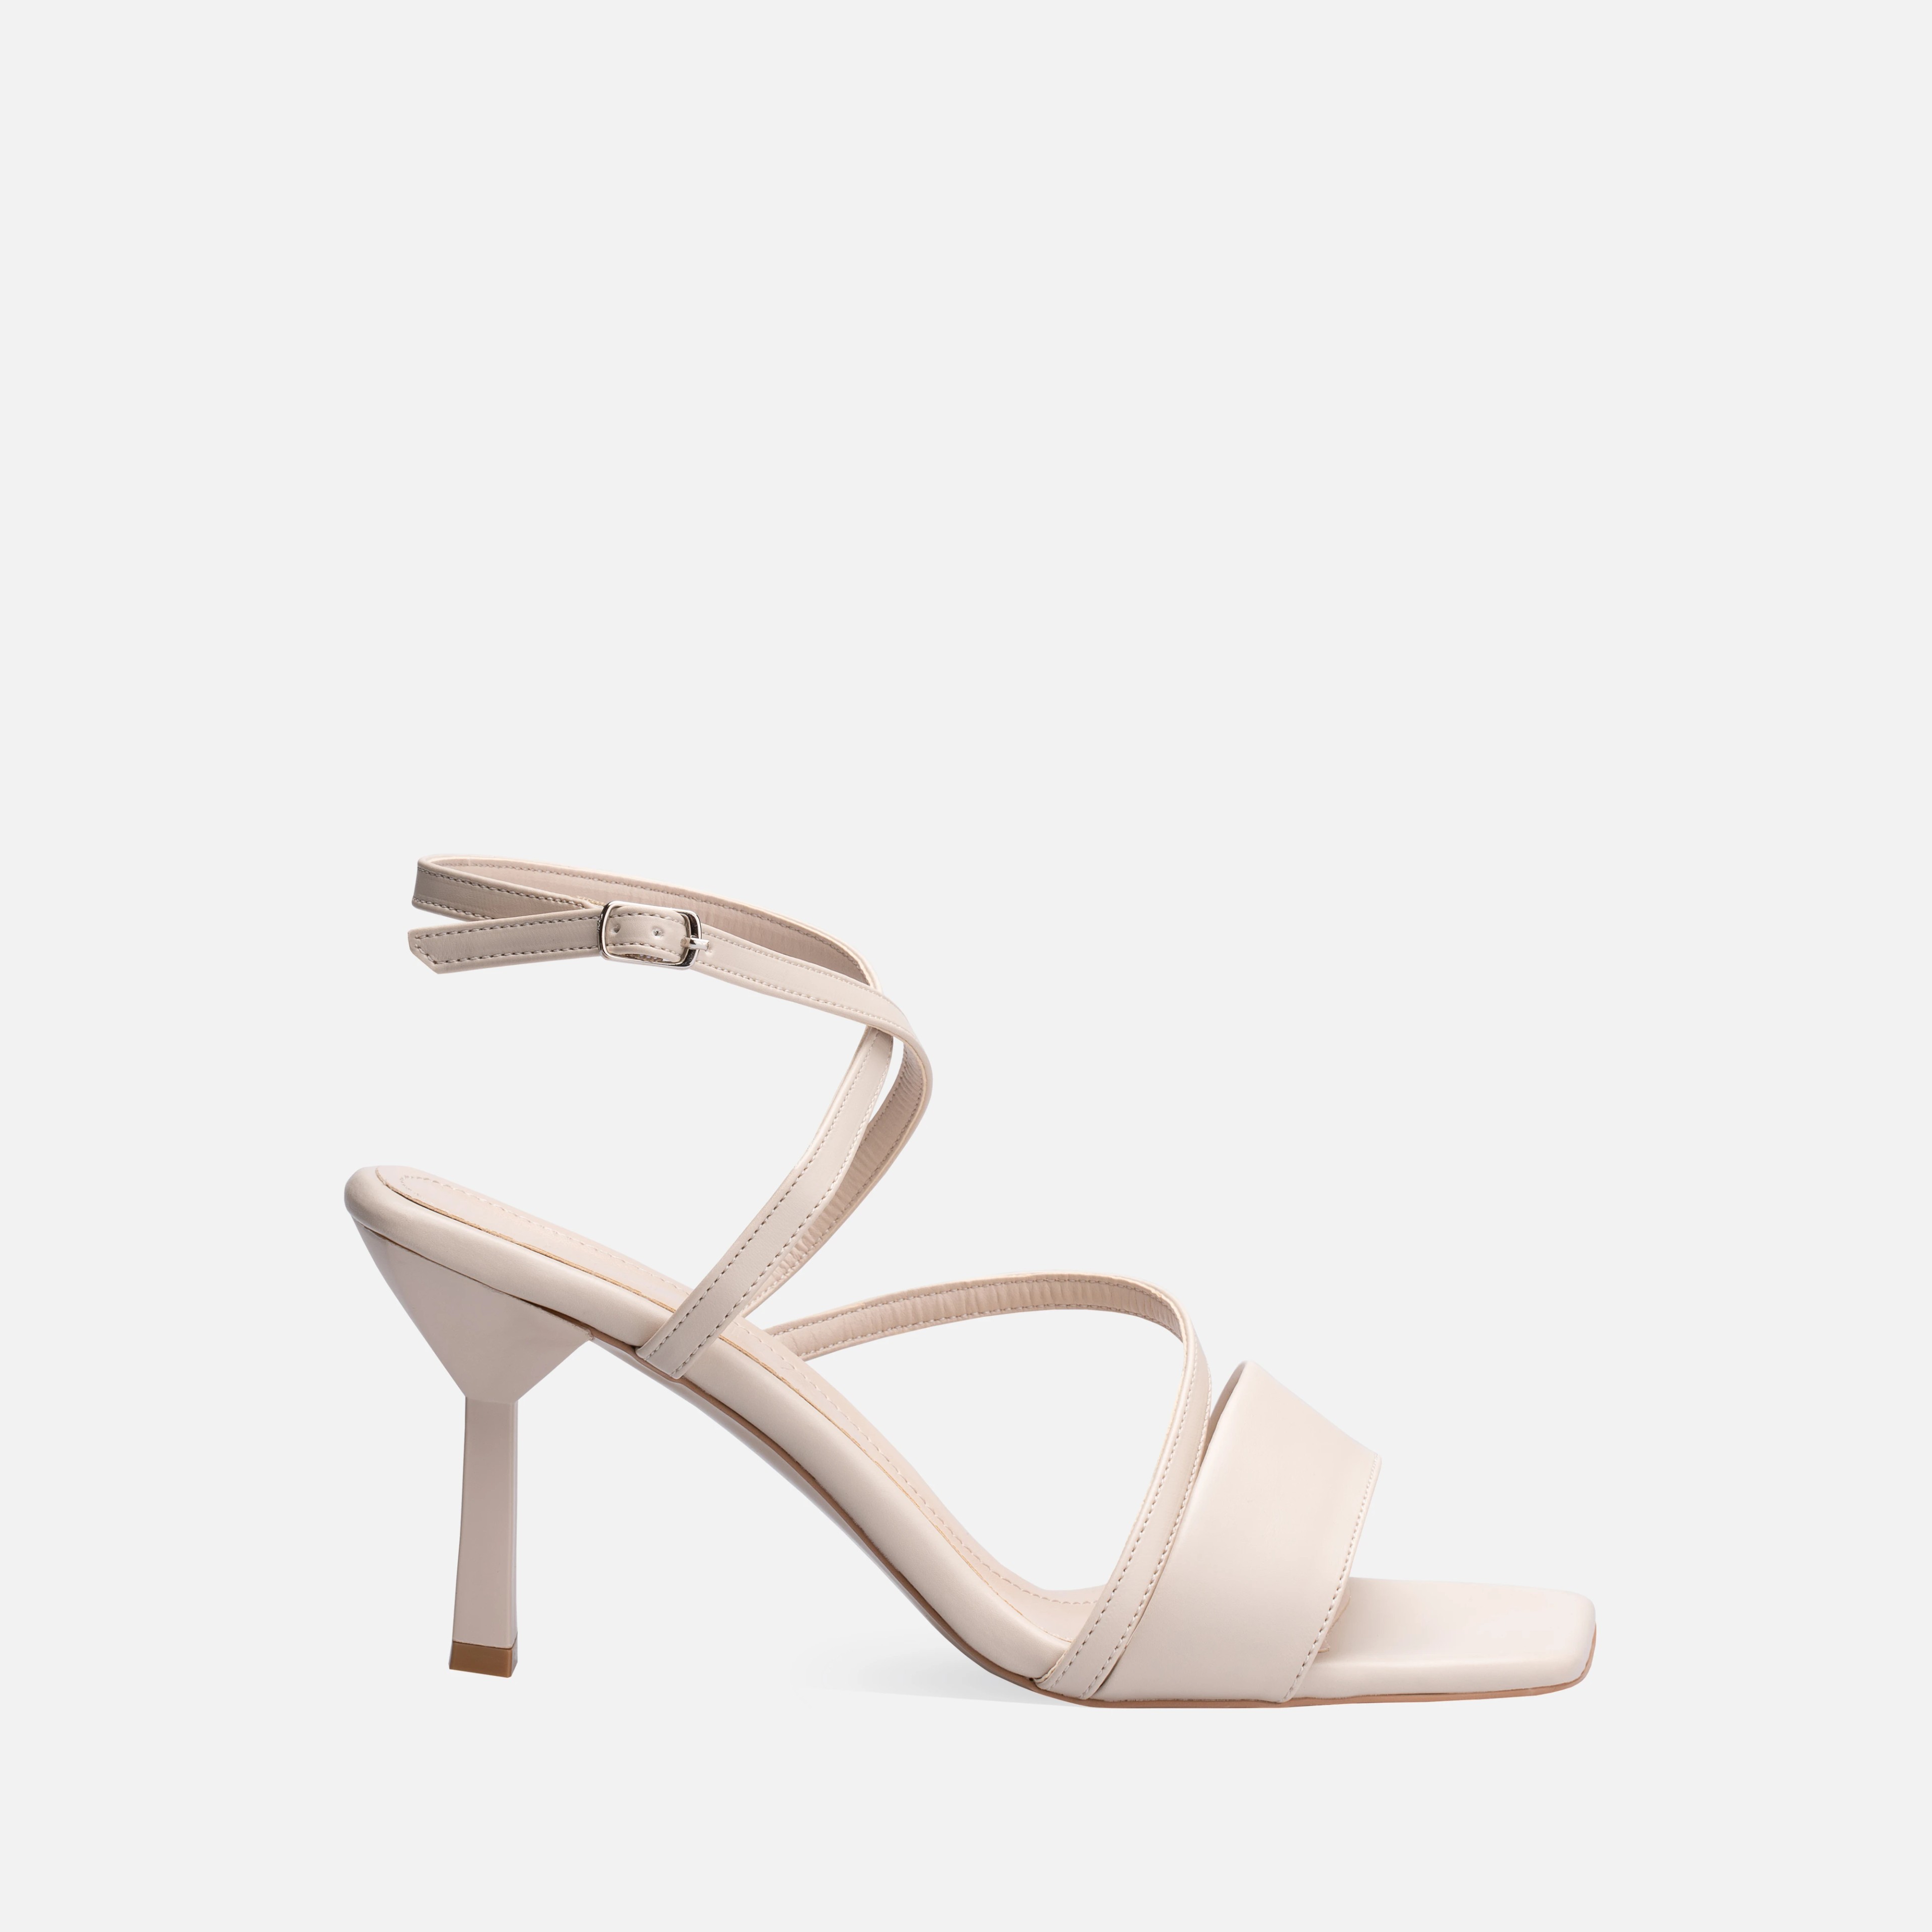 Thin High-Heeled Shoes - Beige